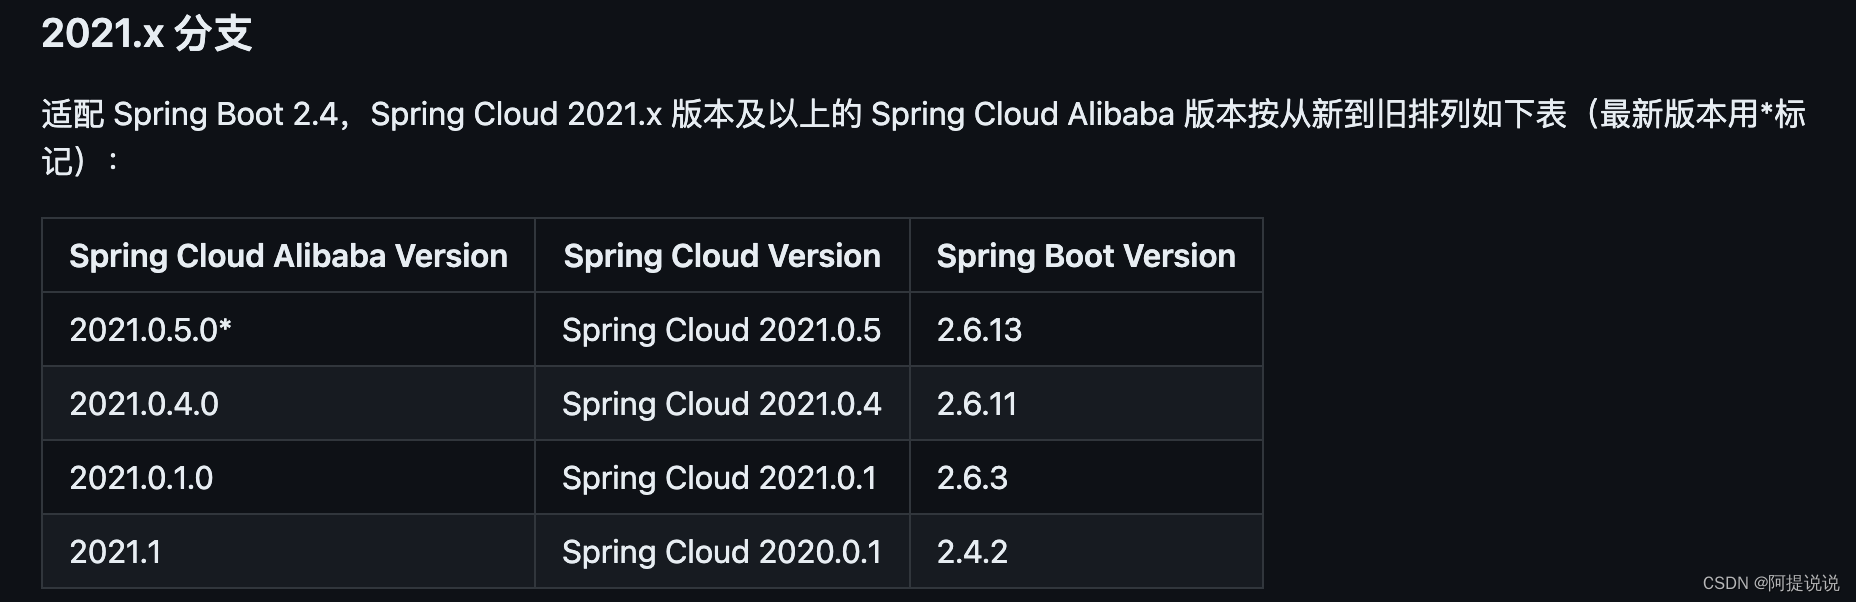 SpringCloud <span style='color:red;'>微</span><span style='color:red;'>服务</span>集群升级记录（1.<span style='color:red;'>5</span>.x-2.7.18）